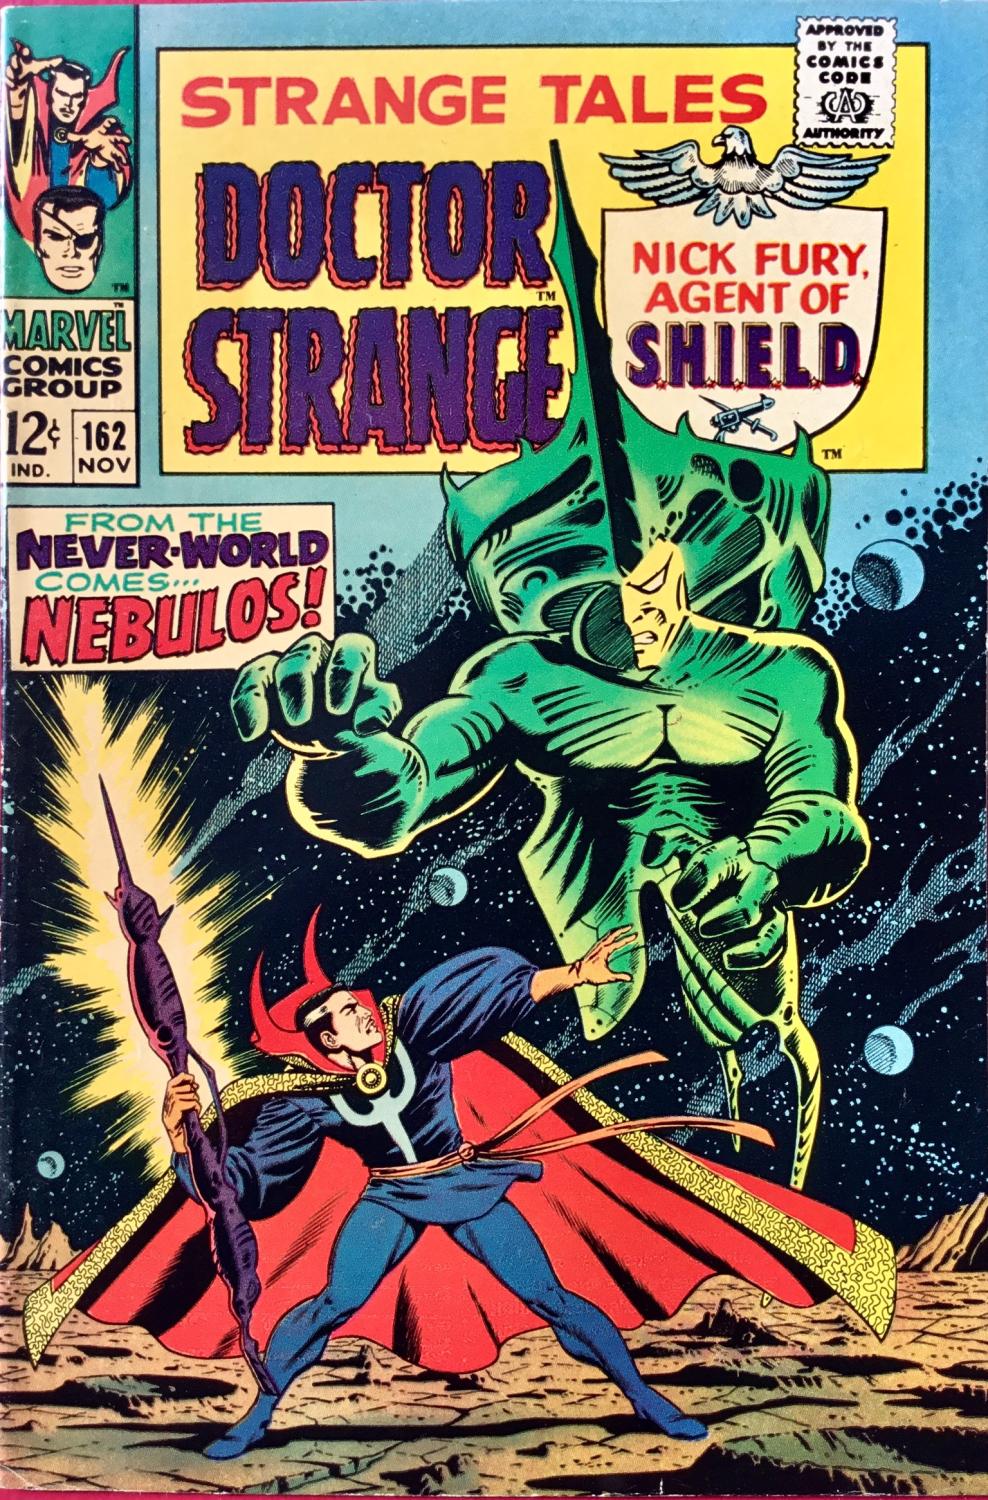 Strange Tales #147 Featuring Nick Fury & Doctor Strange A4 Size - 210 x 297mm - 8.5 x 11.75 Front Cover Reproduction